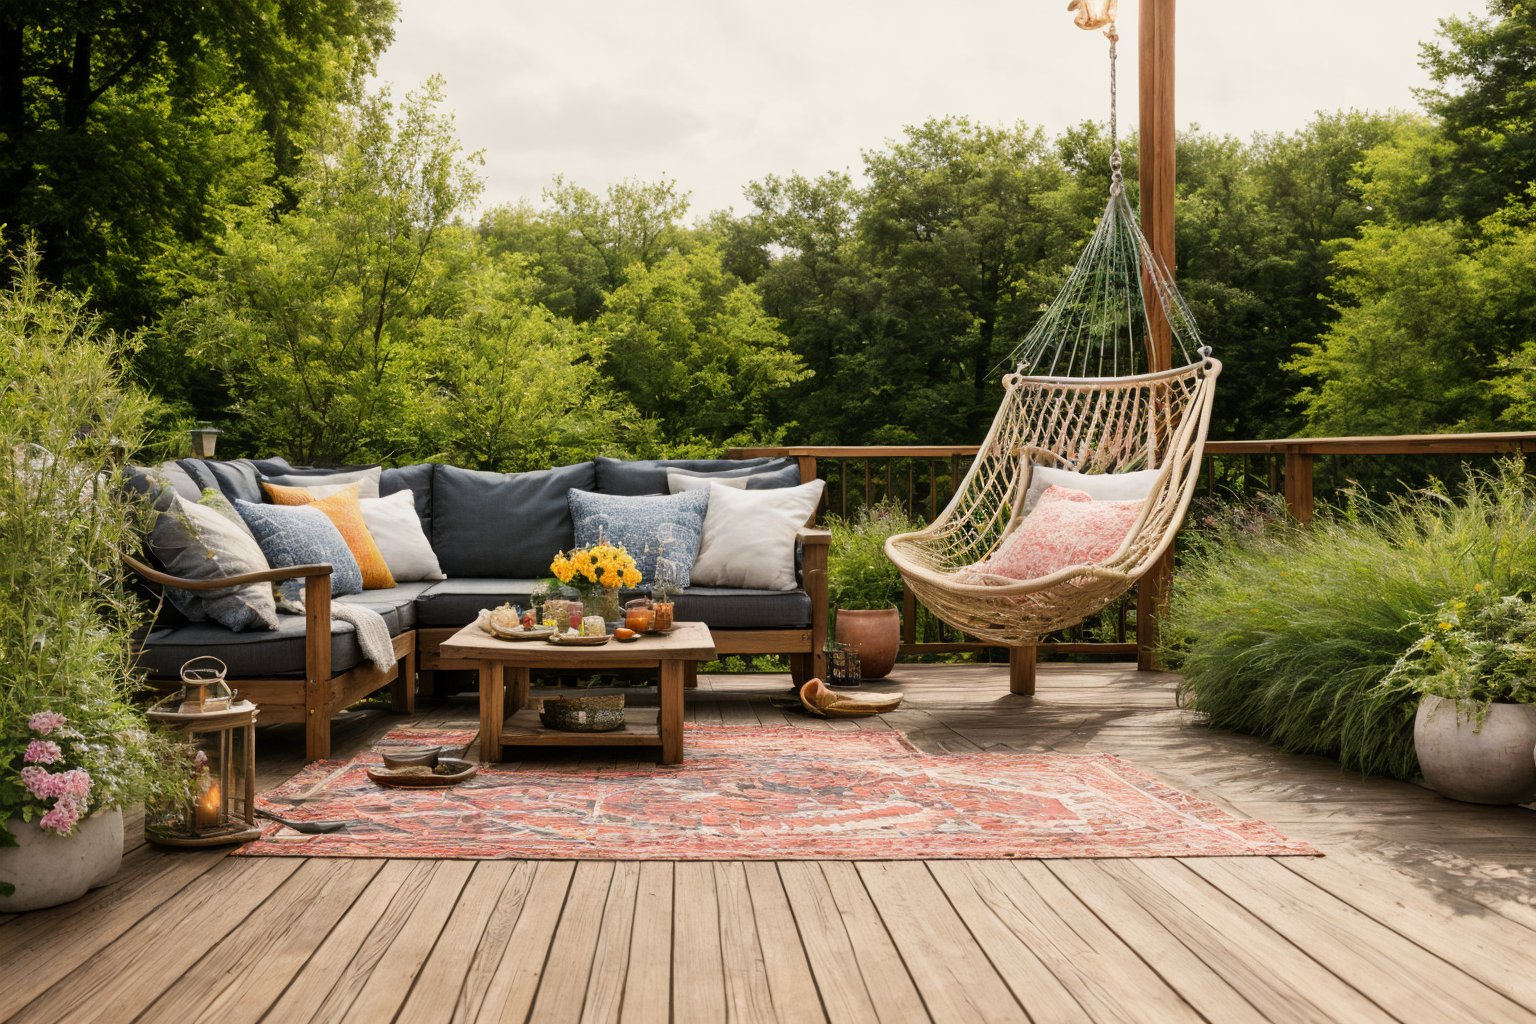 Dive into the world of Photography, capturing the essence of a wooden deck with a hammock chair and a couch in the middle, surrounded by a burst of summer vibrancy. Through the lens of a 35mm camera, inspired by the techniques of Christian Hilfgott Brand, the scene unfolds with an arts and crafts movement touch. The deck is bathed in warm sunlight, casting gentle shadows. The flowers around the deck sway gently, adding a touch of summer breeze. The color temperature is warm, with no facial expressions to capture. The lighting is soft and natural, creating a serene and inviting atmosphere.  <lora:lora_garden_architecture_Exterior_SDlife_Chiasedamme_V1.0:0.6>